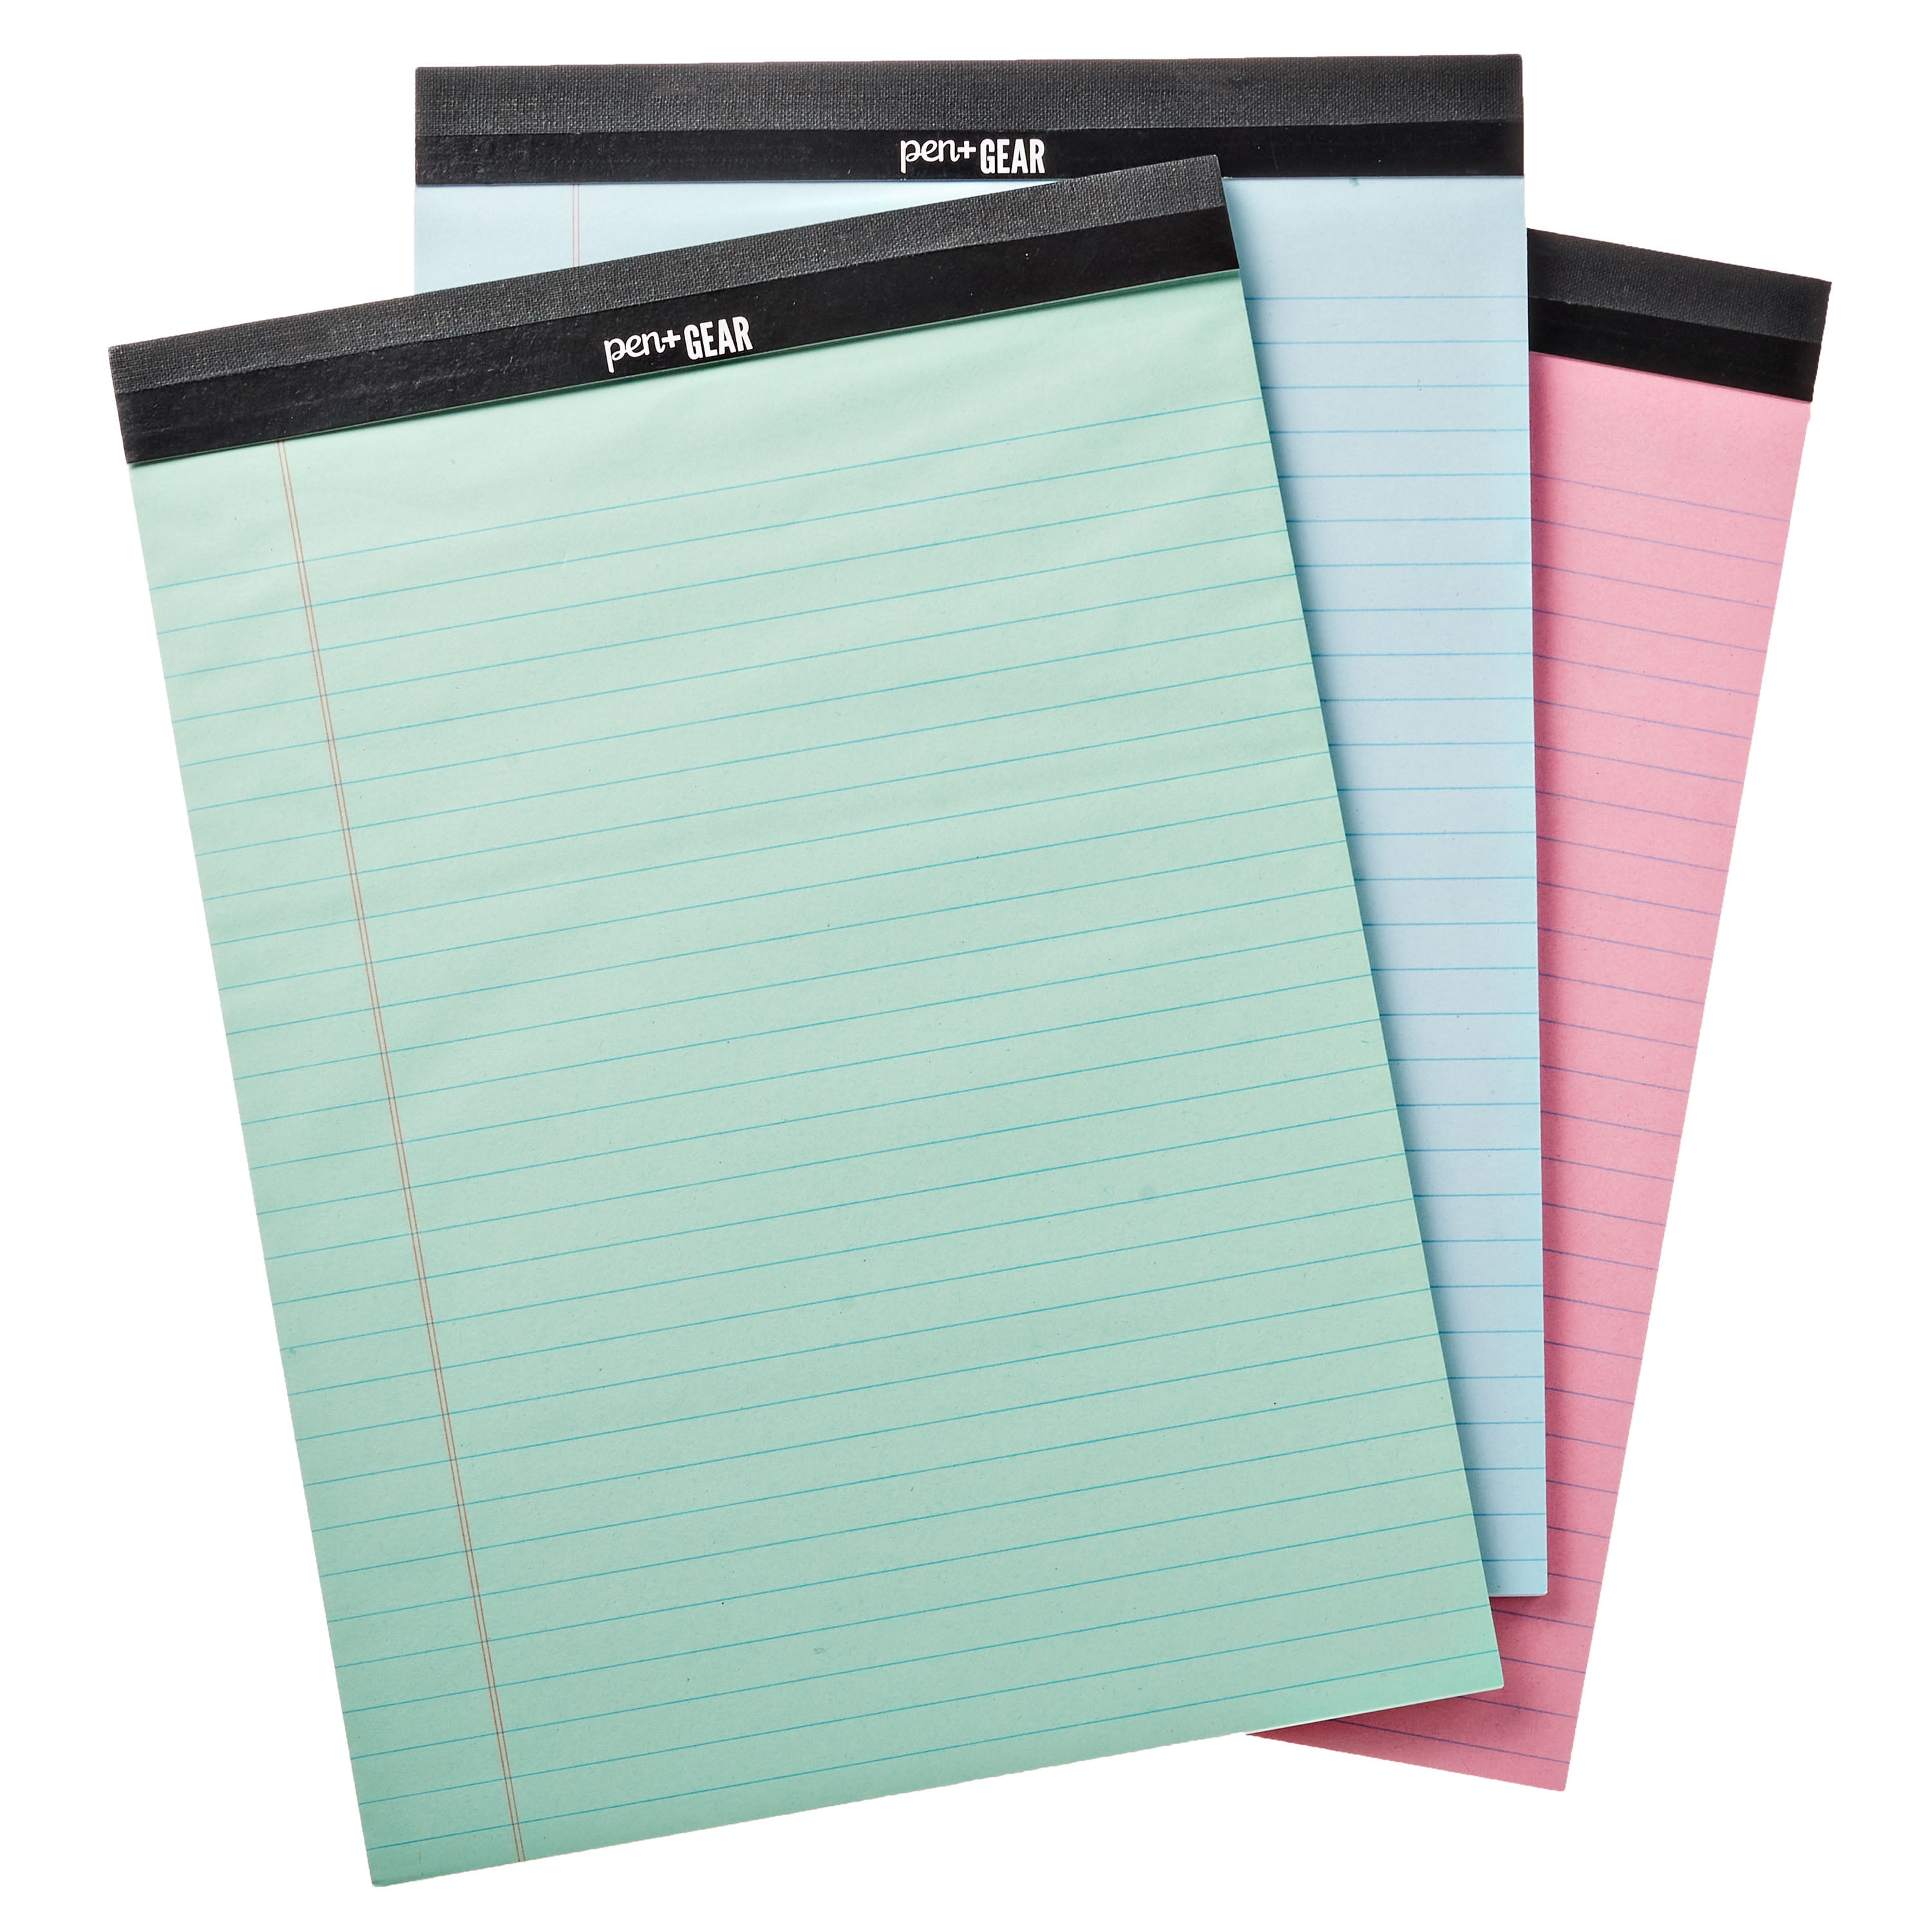 Professional Office Micro perforated Writing Pad Mintra Office Legal Pads - DOUBLE PAD 2PK, CANARY, 8.5in x 11in, WIDE RULED Notebook Paper for School College - 100 Sheets per Notepad